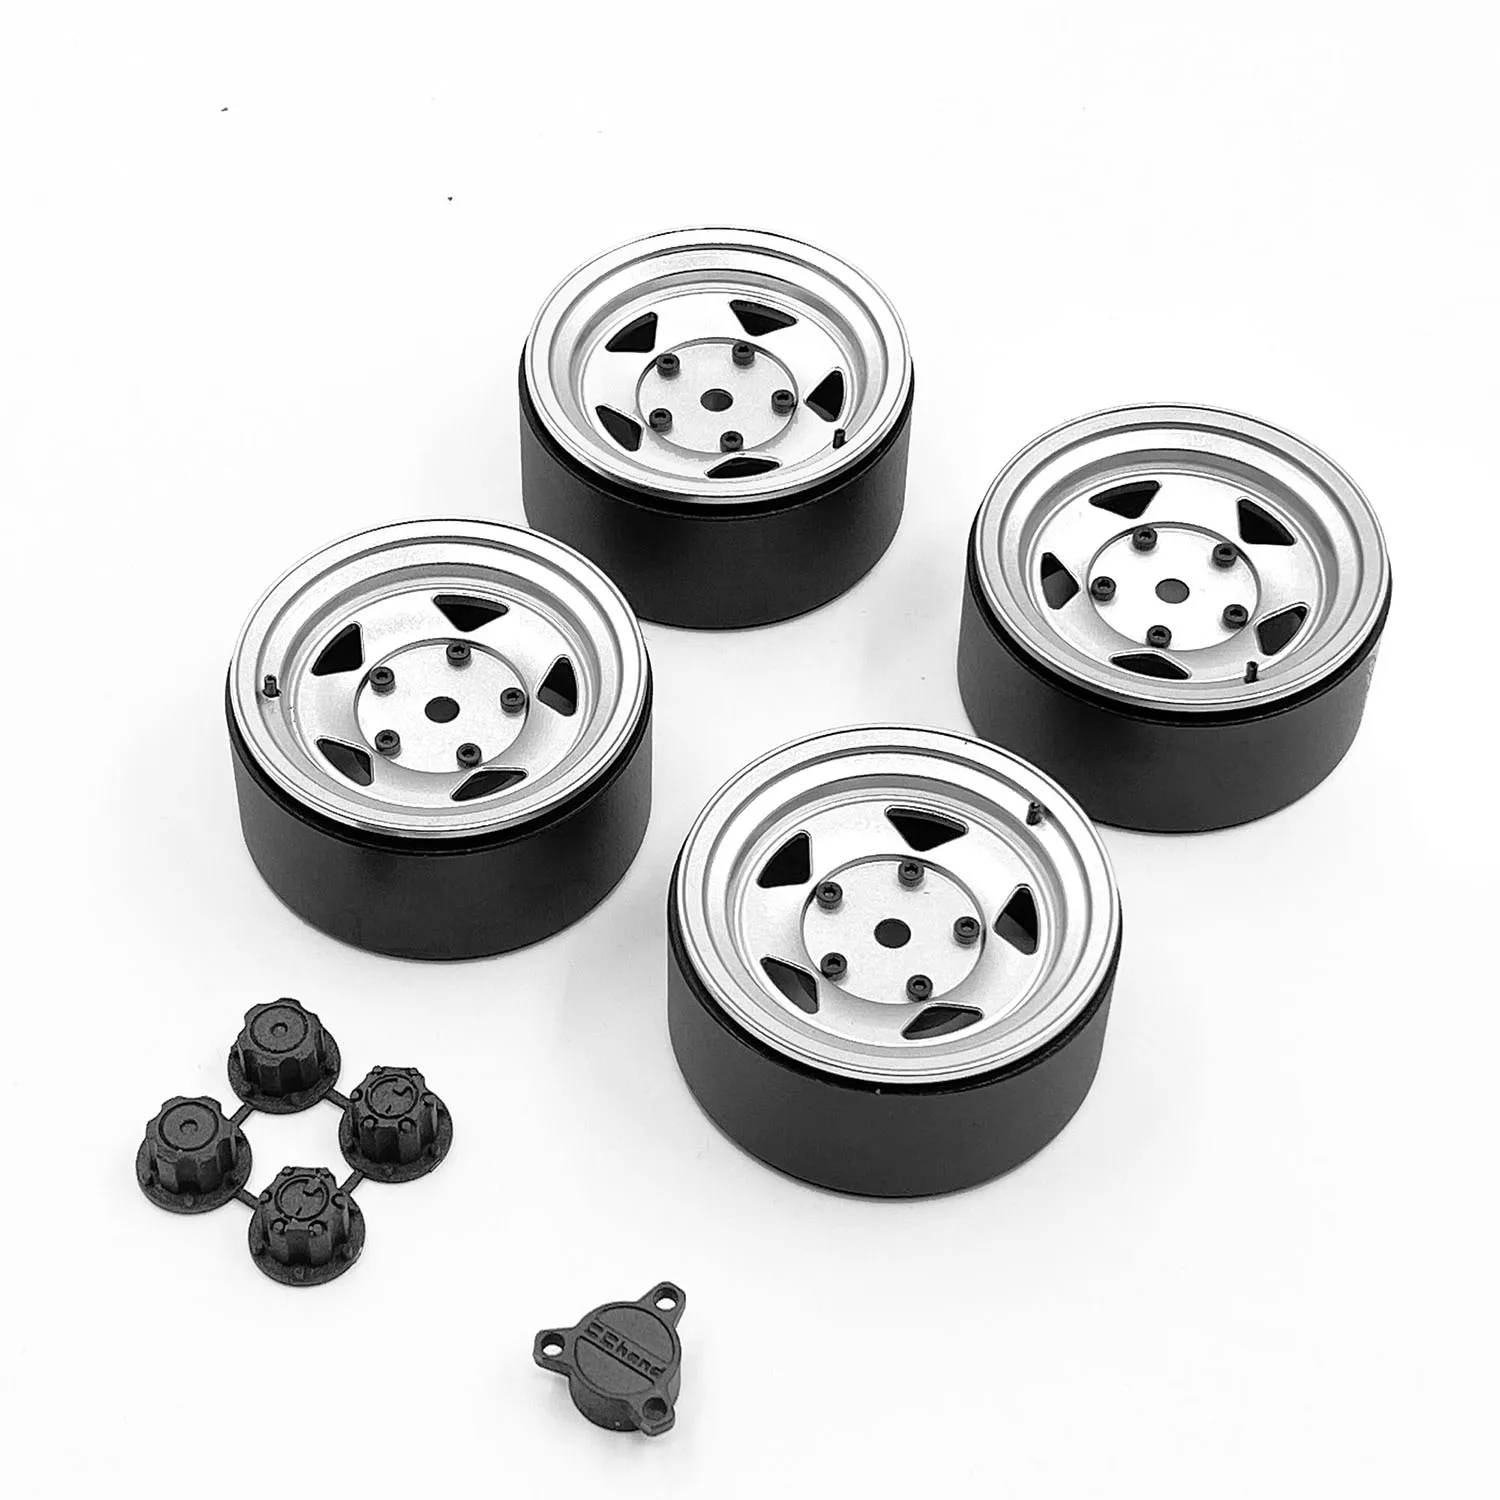 

Toucan CCHand RC4WD Alloy Metal Wheel Hubs for 1:6 Jimnya RC Crawler Car Capo Samuraii Sixer1 Upgraded Accessories TH20906-SMT8